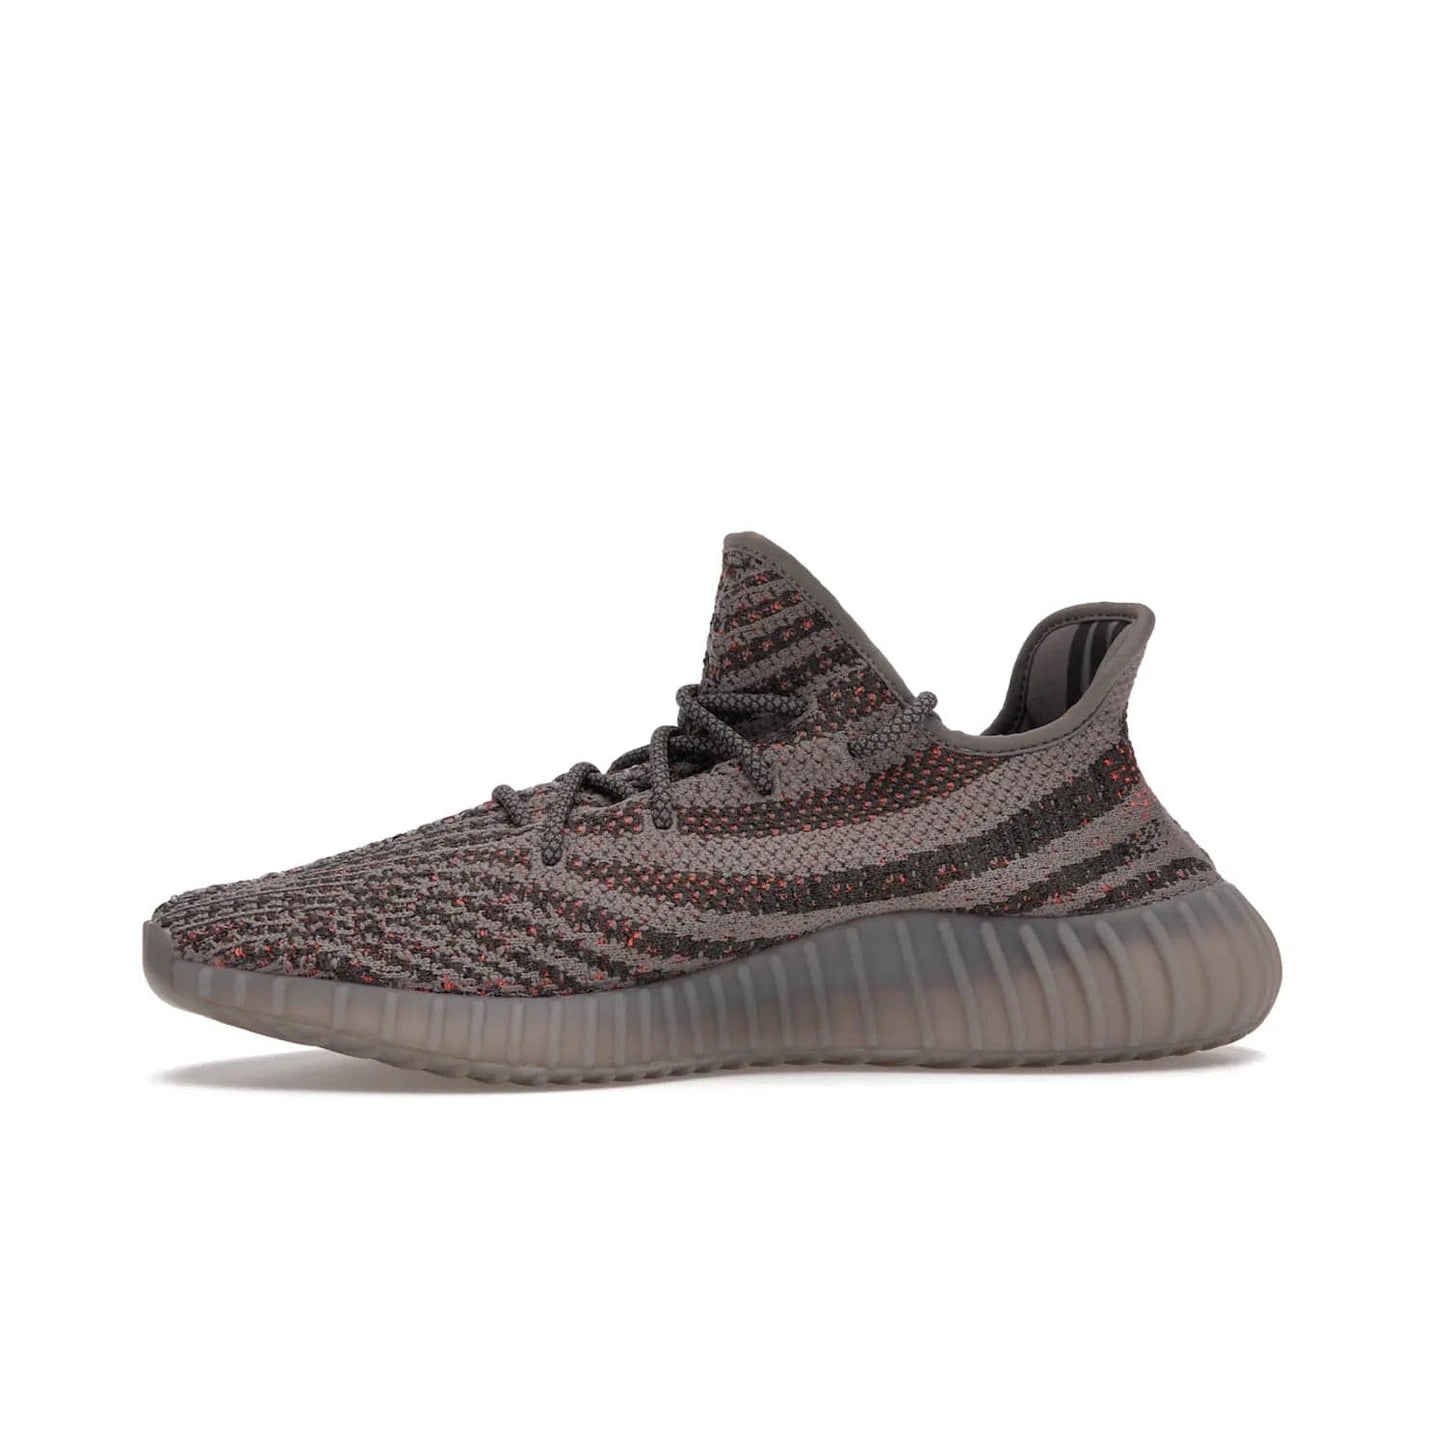 adidas Yeezy Boost 350 V2 Beluga Reflective - Image 18 - Only at www.BallersClubKickz.com - Shop the adidas Yeezy Boost 350 V2 Beluga Reflective: a stylish, reflective sneaker that stands out. Featuring Boost sole, Primeknit upper & signature orange stripe. Available Dec 2021.